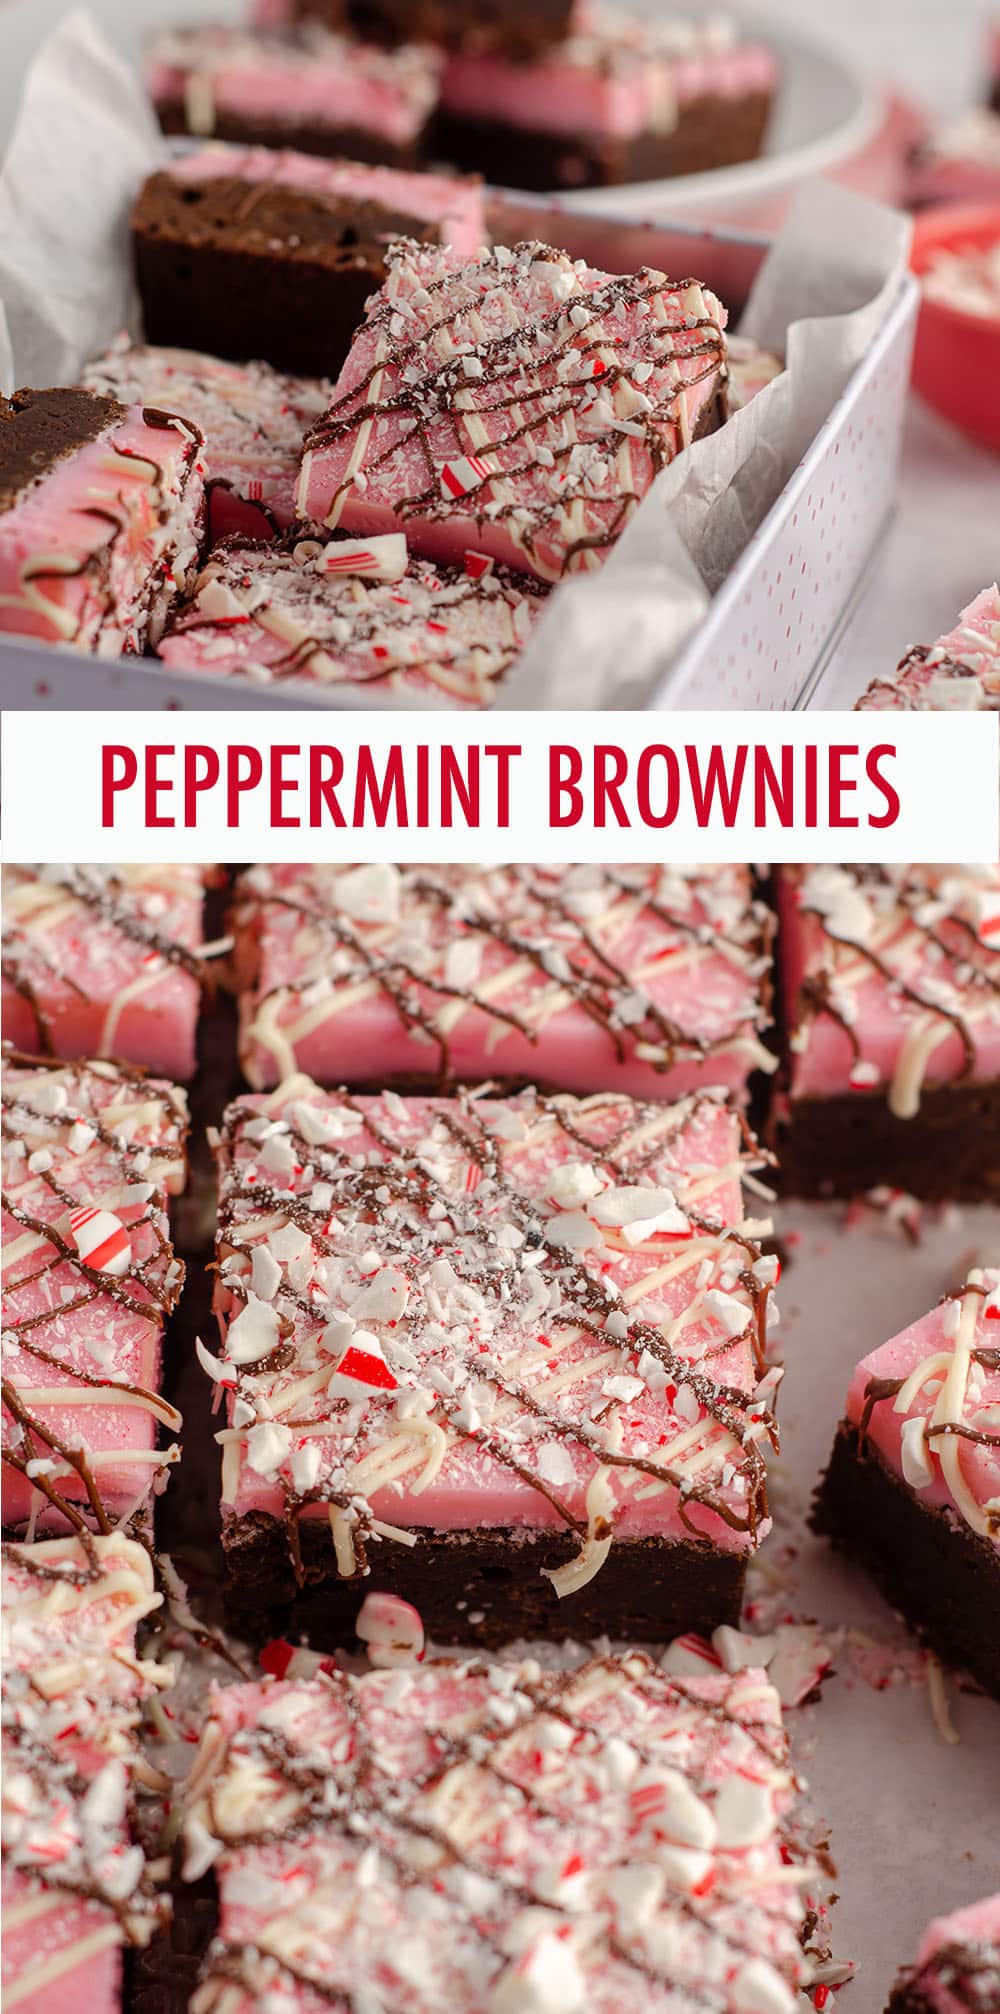 These peppermint brownies are made from a fudgy scratch brownie base and topped with a creamy peppermint buttercream. Top them with drizzled chocolate and crushed candy canes for a festive holiday treat! via @frshaprilflours